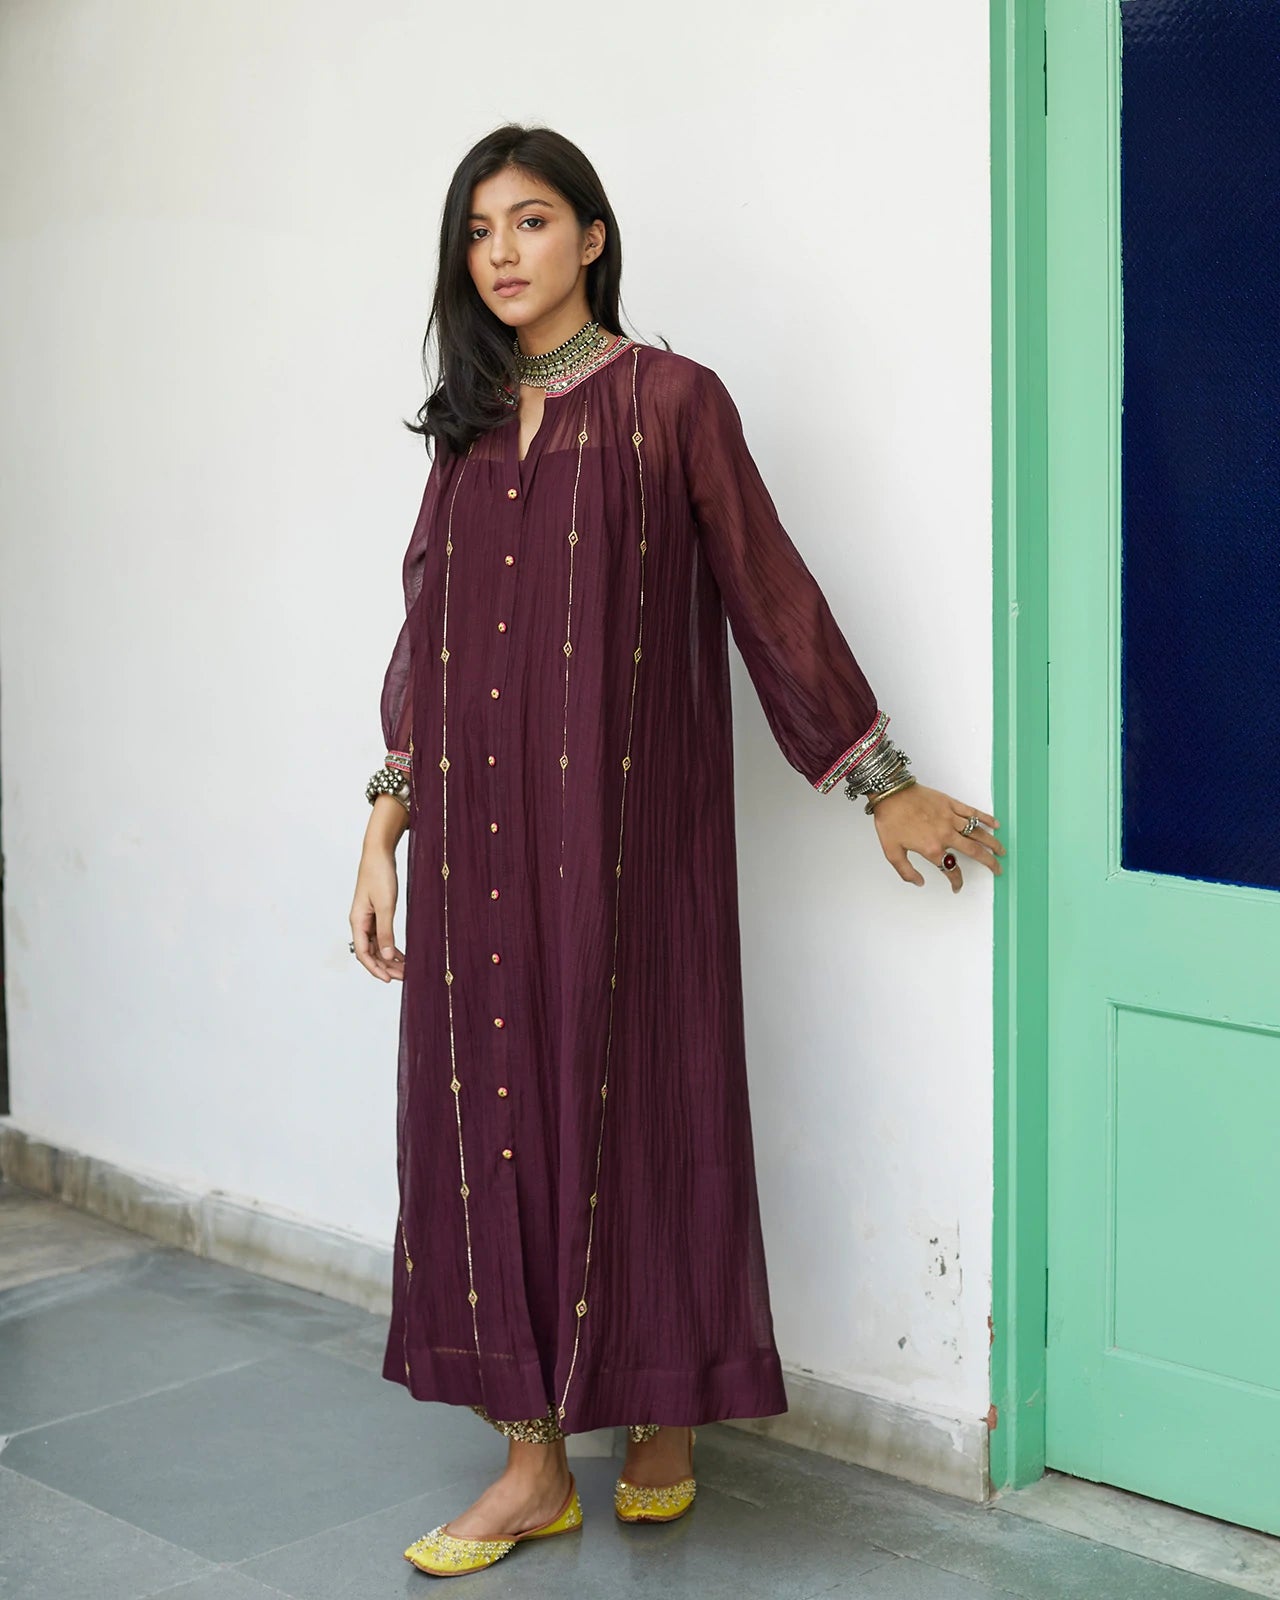 Wine Puckered Collar Kurta Set - Indian Clothing in Denver, CO, Aurora, CO, Boulder, CO, Fort Collins, CO, Colorado Springs, CO, Parker, CO, Highlands Ranch, CO, Cherry Creek, CO, Centennial, CO, and Longmont, CO. Nationwide shipping USA - India Fashion X